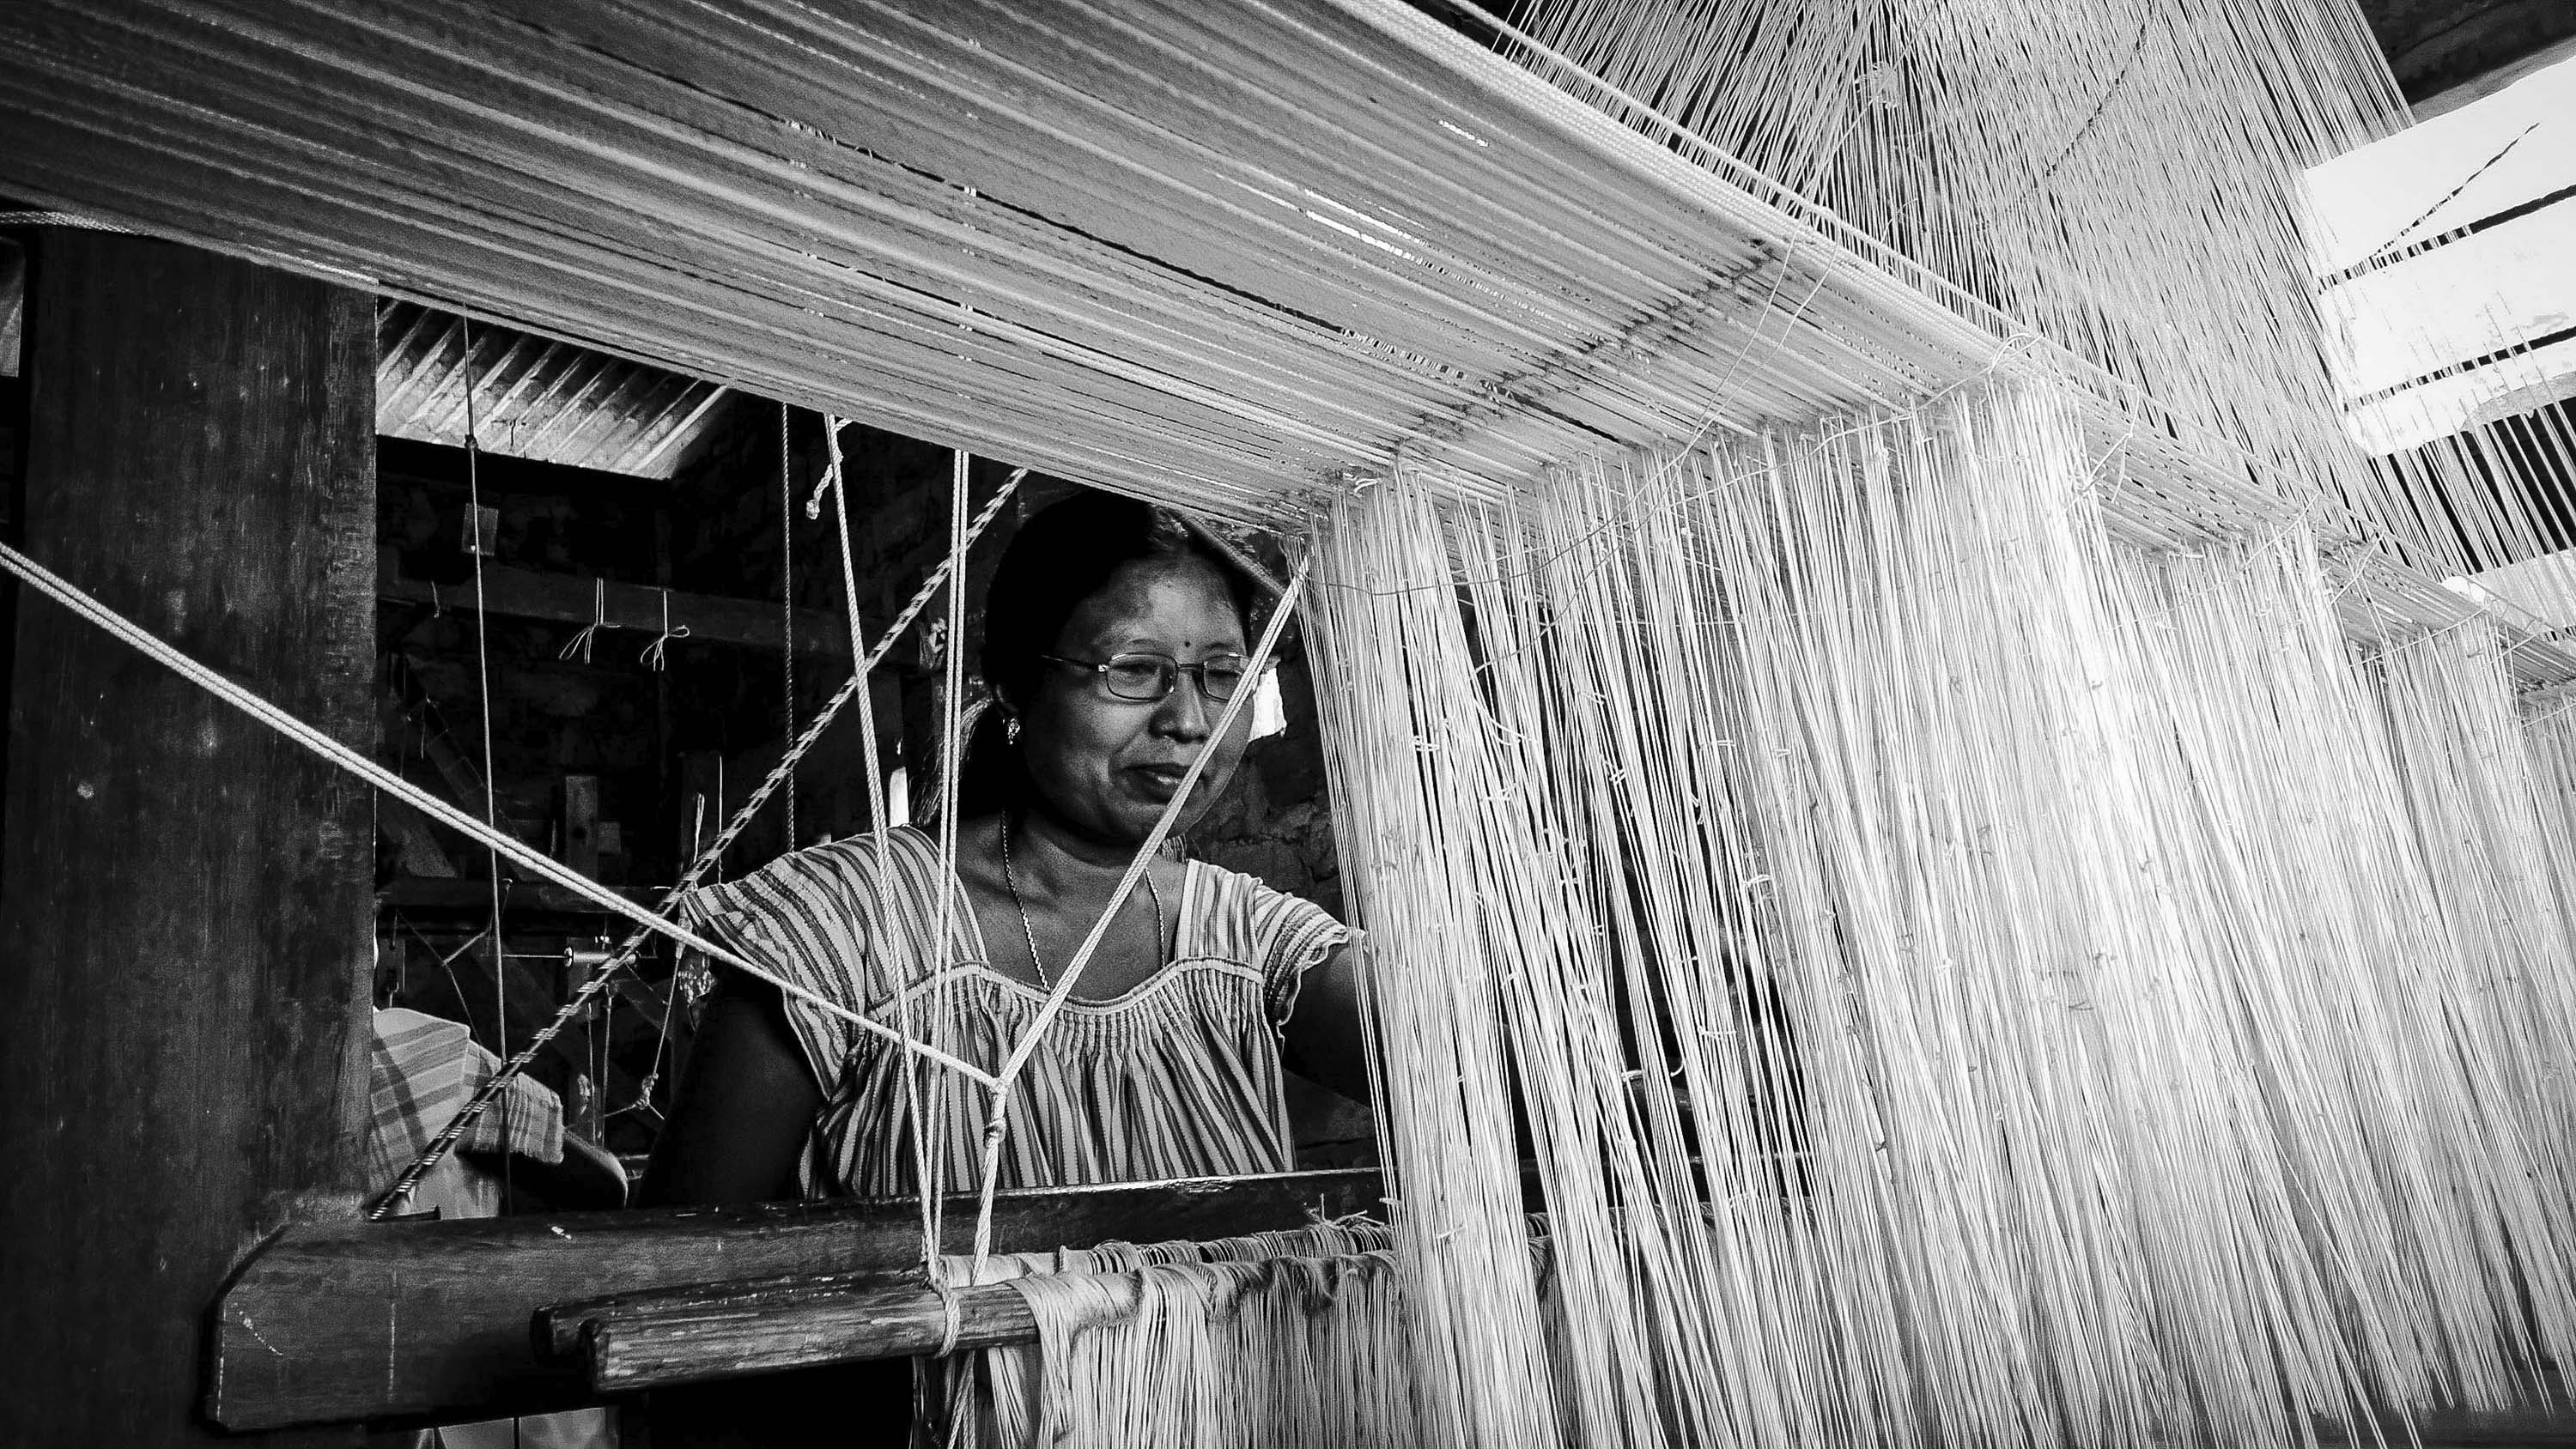 Sharmila, a cancer survivor and a fighter happily immerses herself in the set creating fine quality of Muga Silk, a traditional Assamese costume. She fled her village and came to Kamrup in search of better medical facility and livelihood. Her indomitable courage has given motivation to many women working in the sets and nearby.